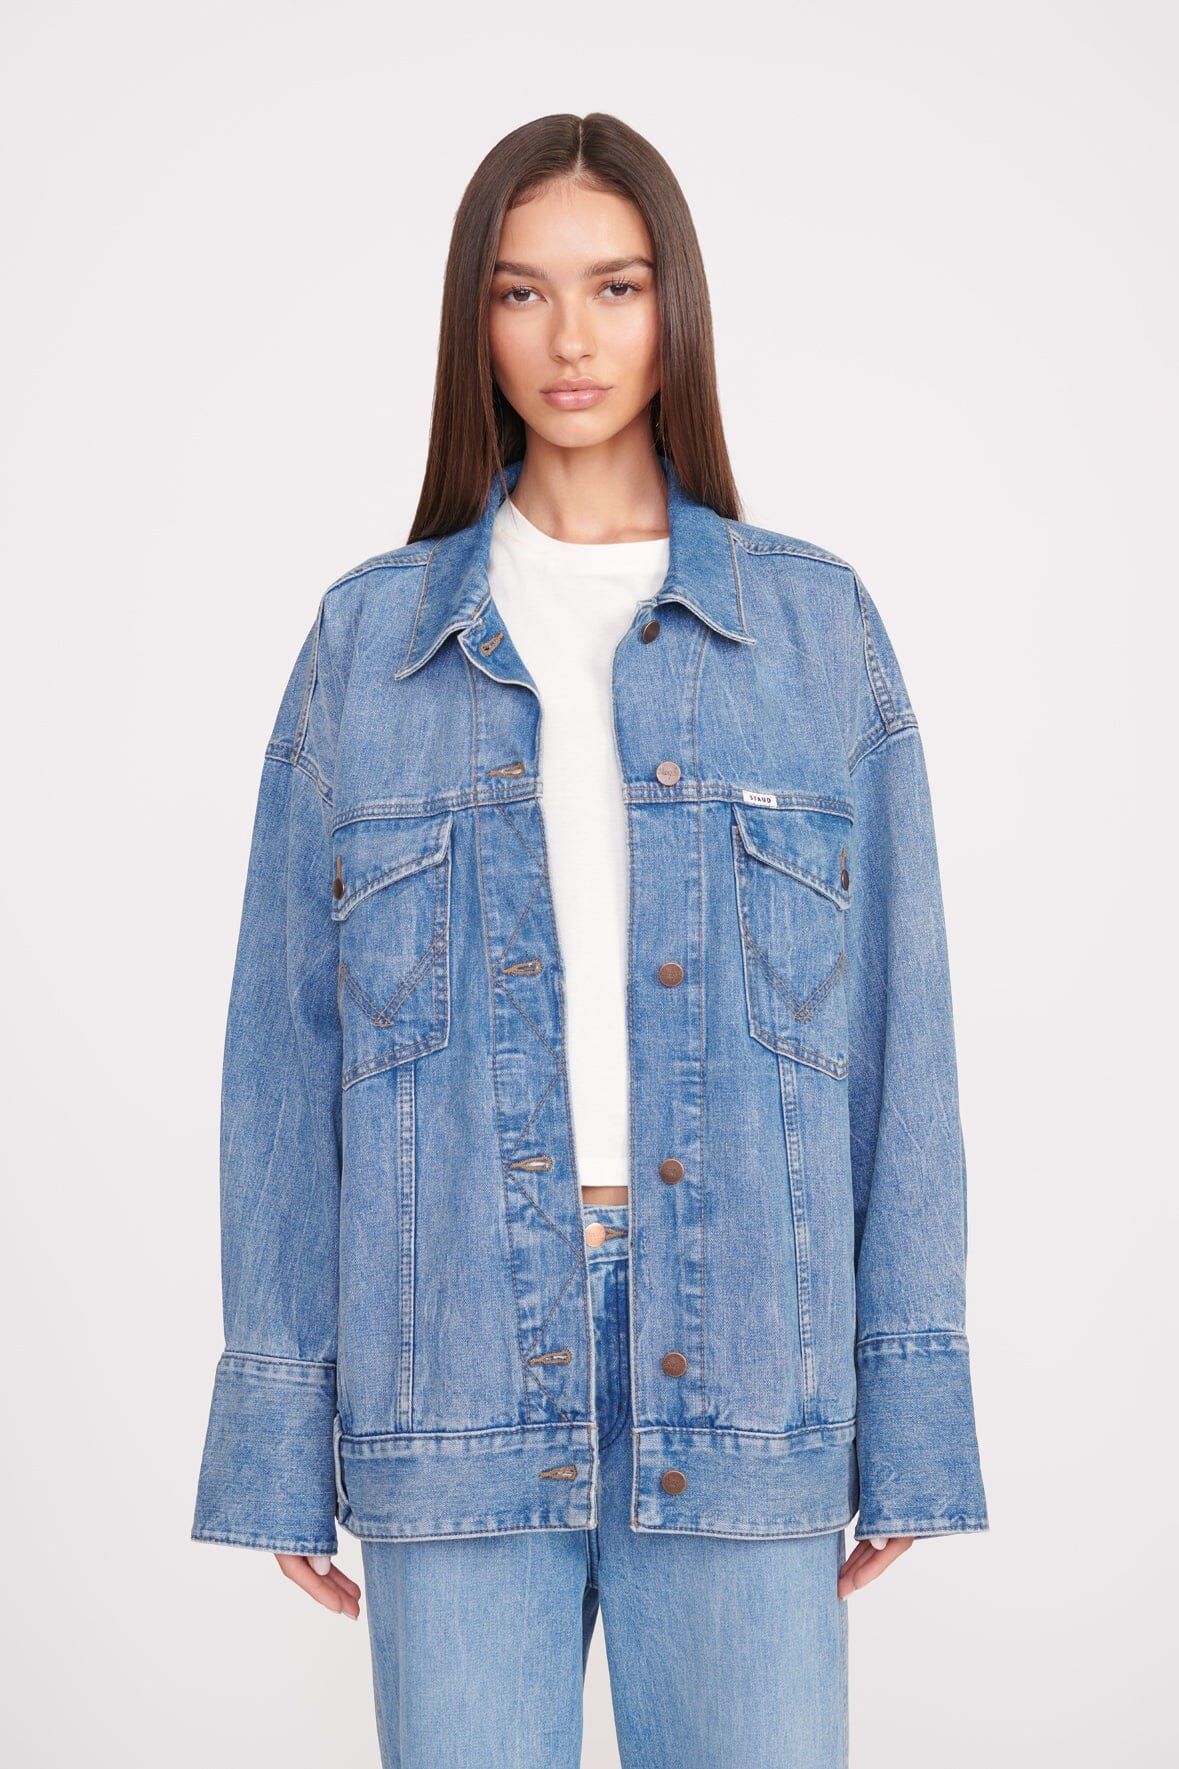 The 10 Best Denim Jackets to Wear This Spring and Beyond